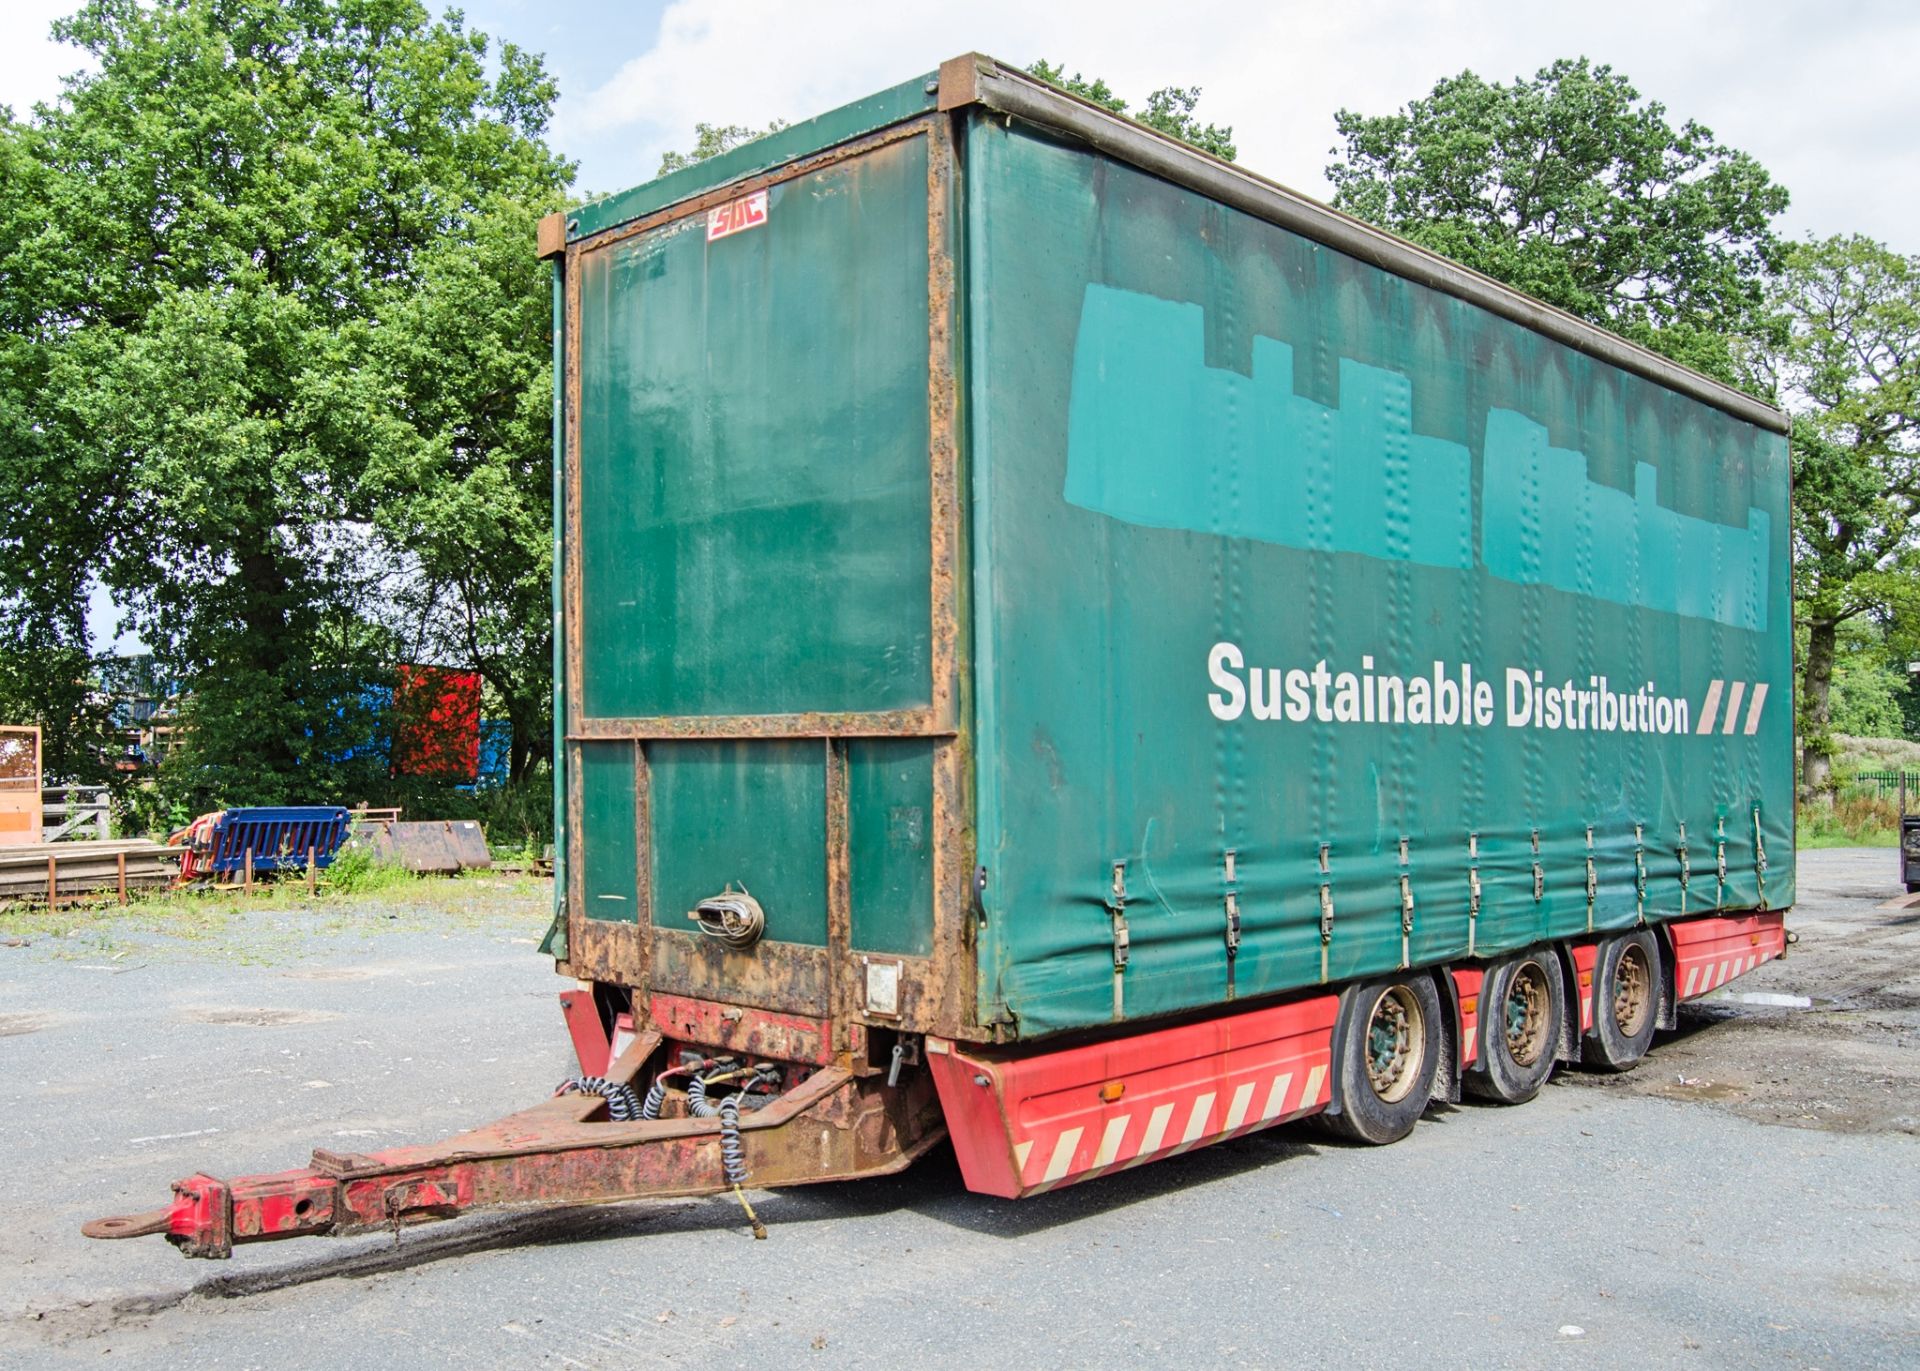 SDC Trailers 8 metre tri-axle curtain sided trailer Year: 2010 Ident: H05700011618 MOT: Expired